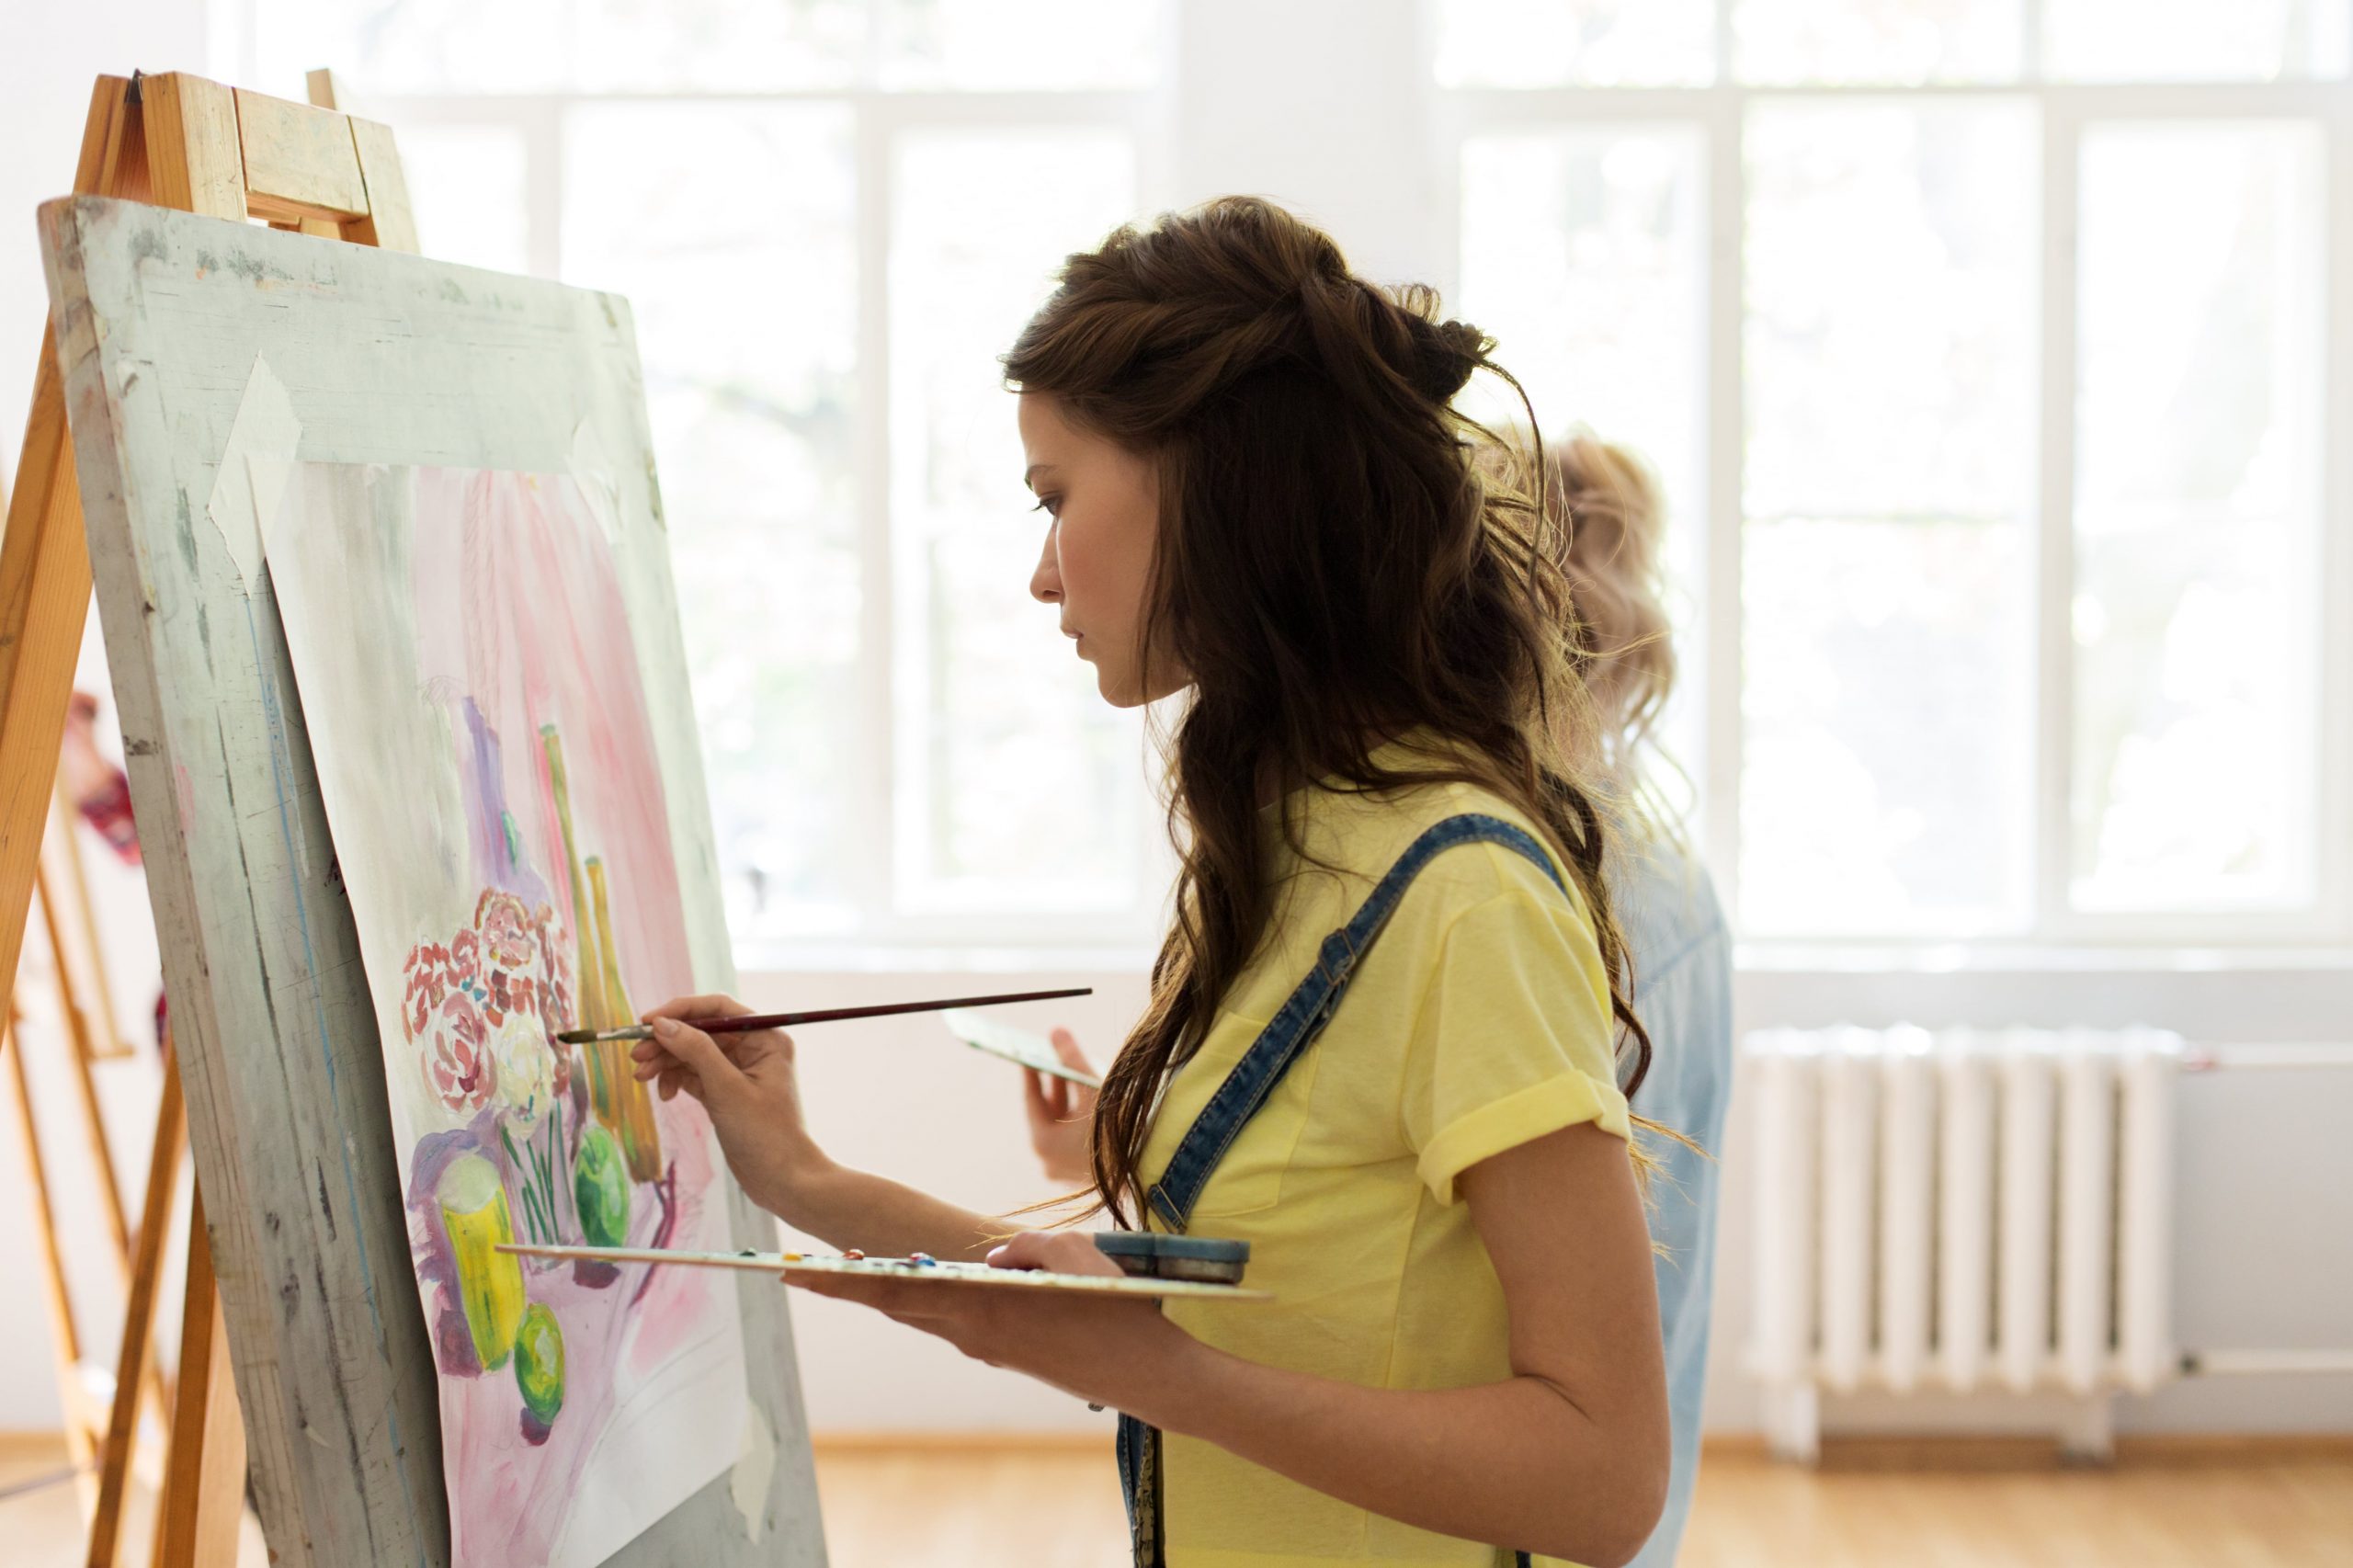 Woman standing at easel, painting on canvas